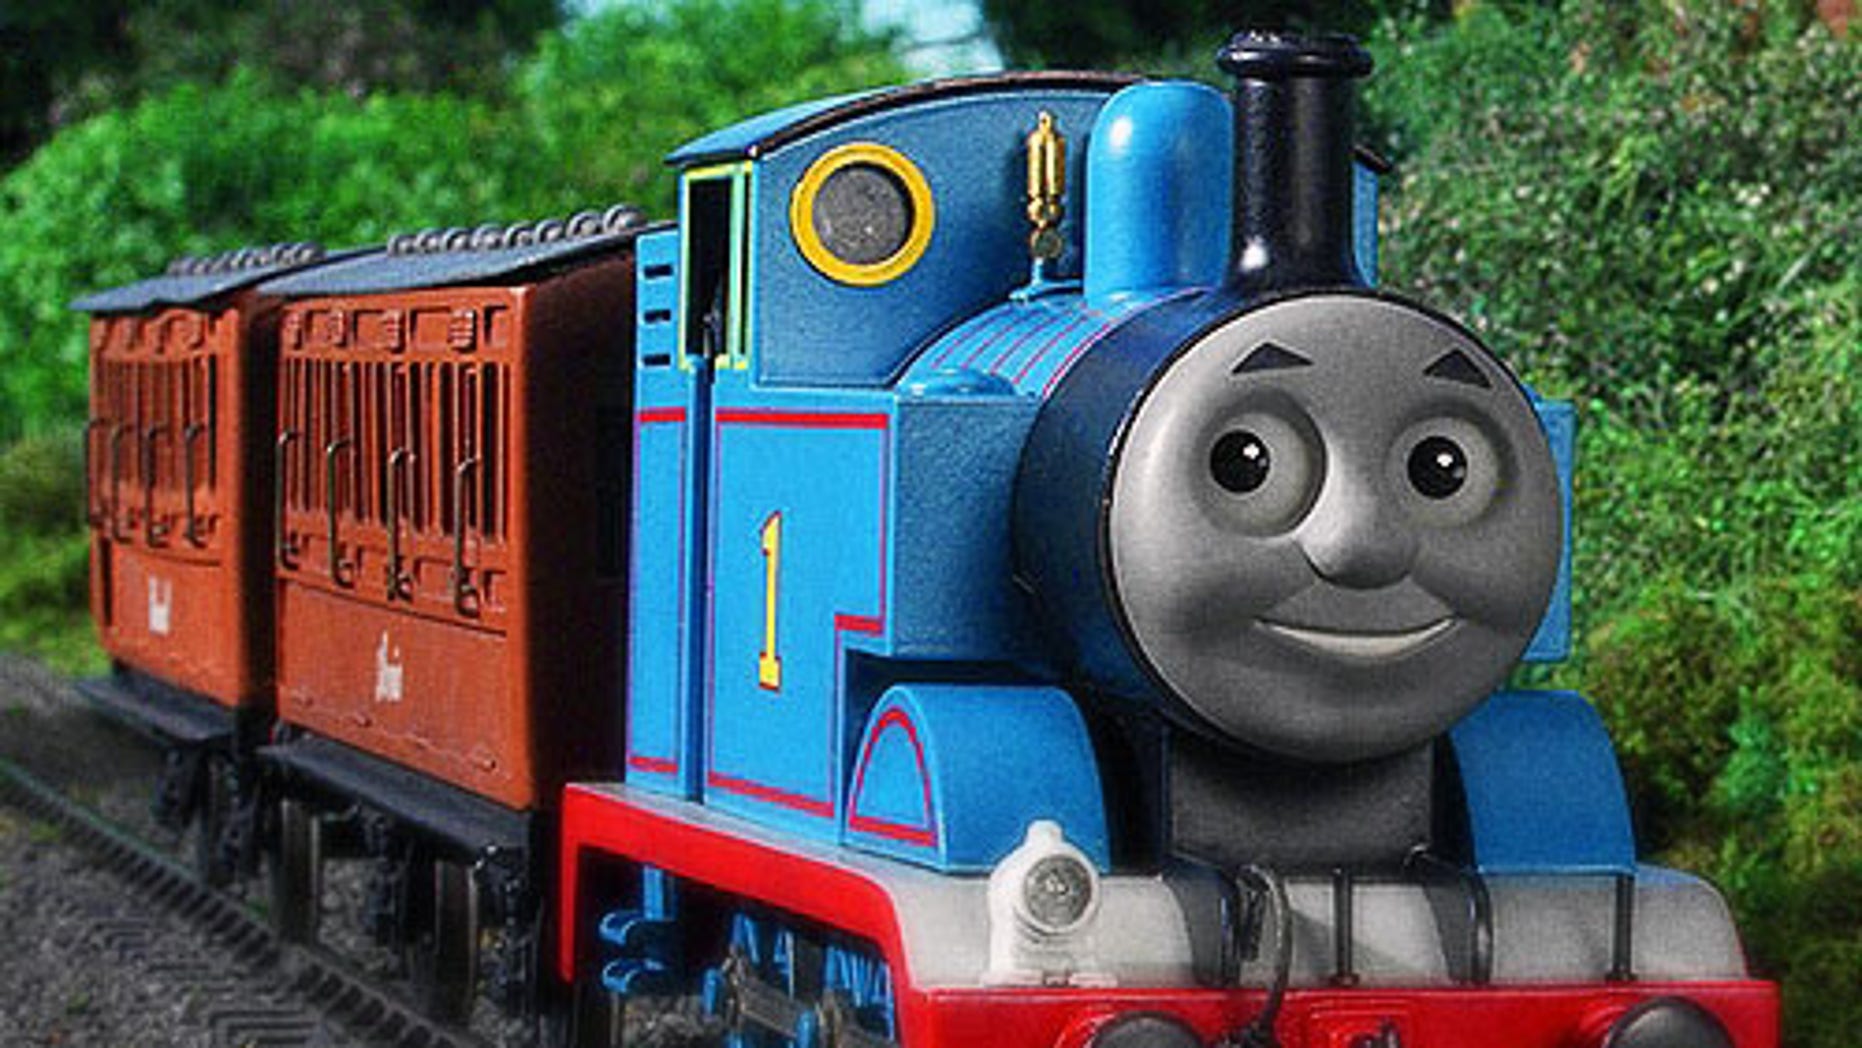 Thomas The Tank Engine Pictures on Sale, UP TO 58% OFF www.